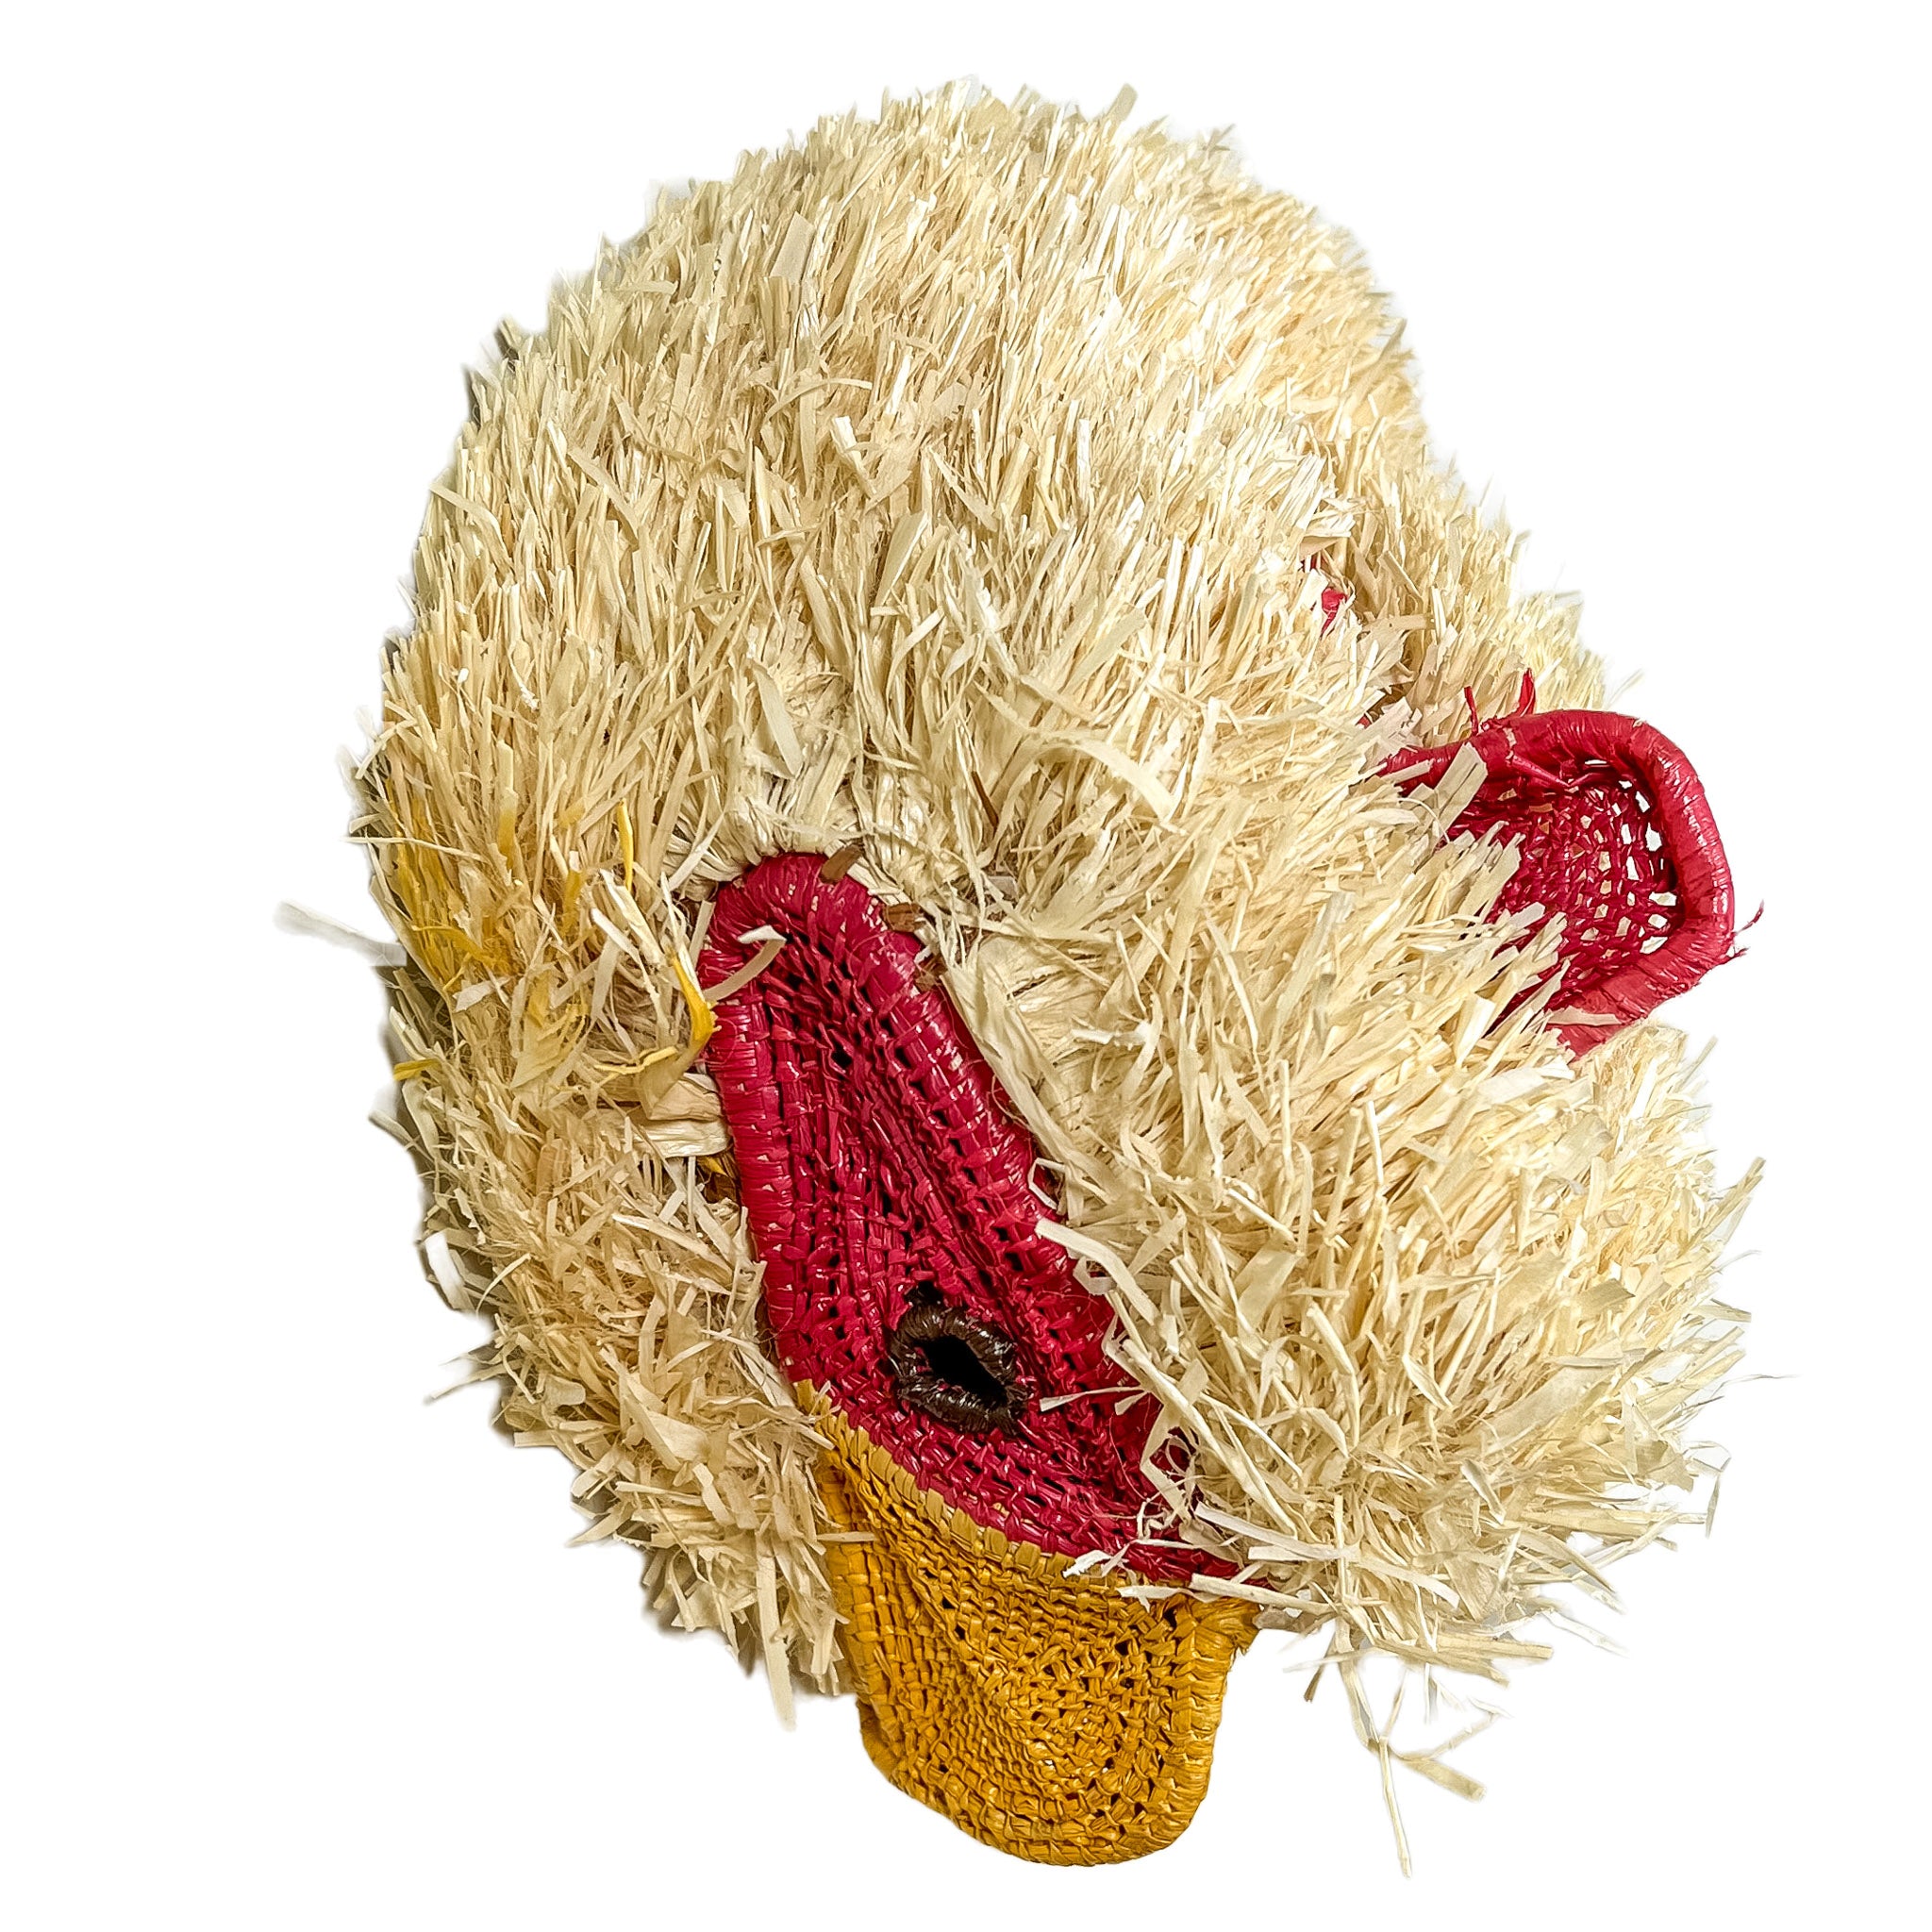 Tropical Chicken Mask